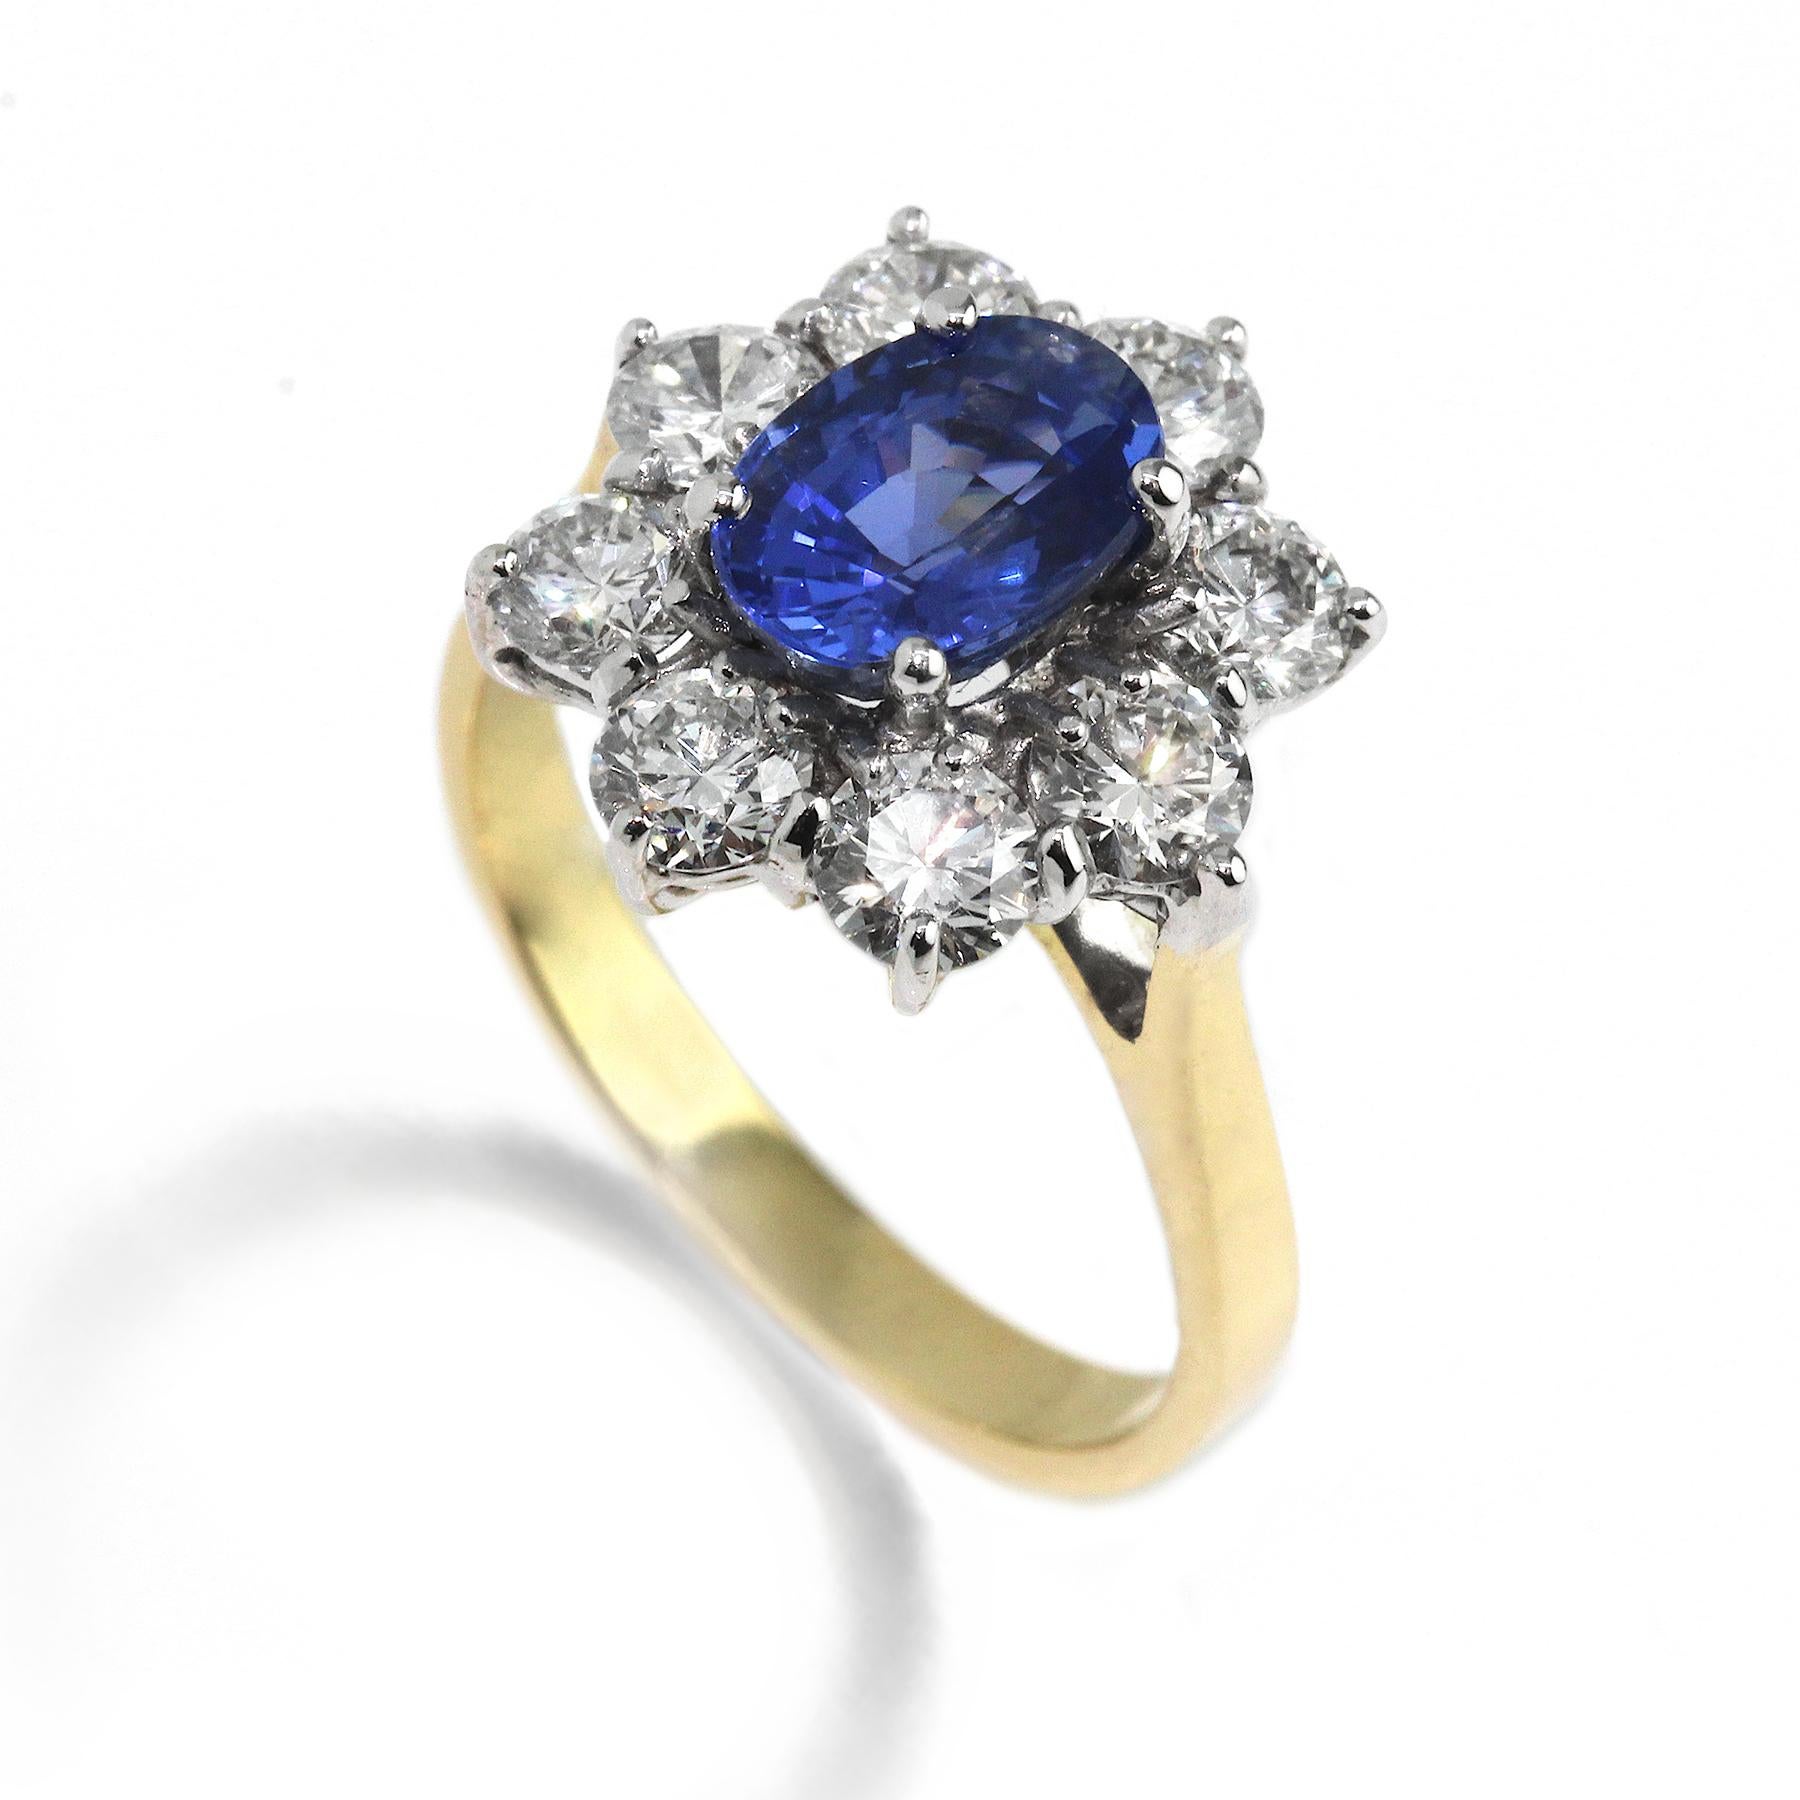 An elegant cluster holding an exquisite sapphire in 18k yellow and white gold. A variation of the classic cluster made with 8 diamonds (1.67ct F VS) surrounding a fine blue sapphire (2.03ct). 
Ring Size: M 1/2. Band Width: 2.7mm. Setting diameter: